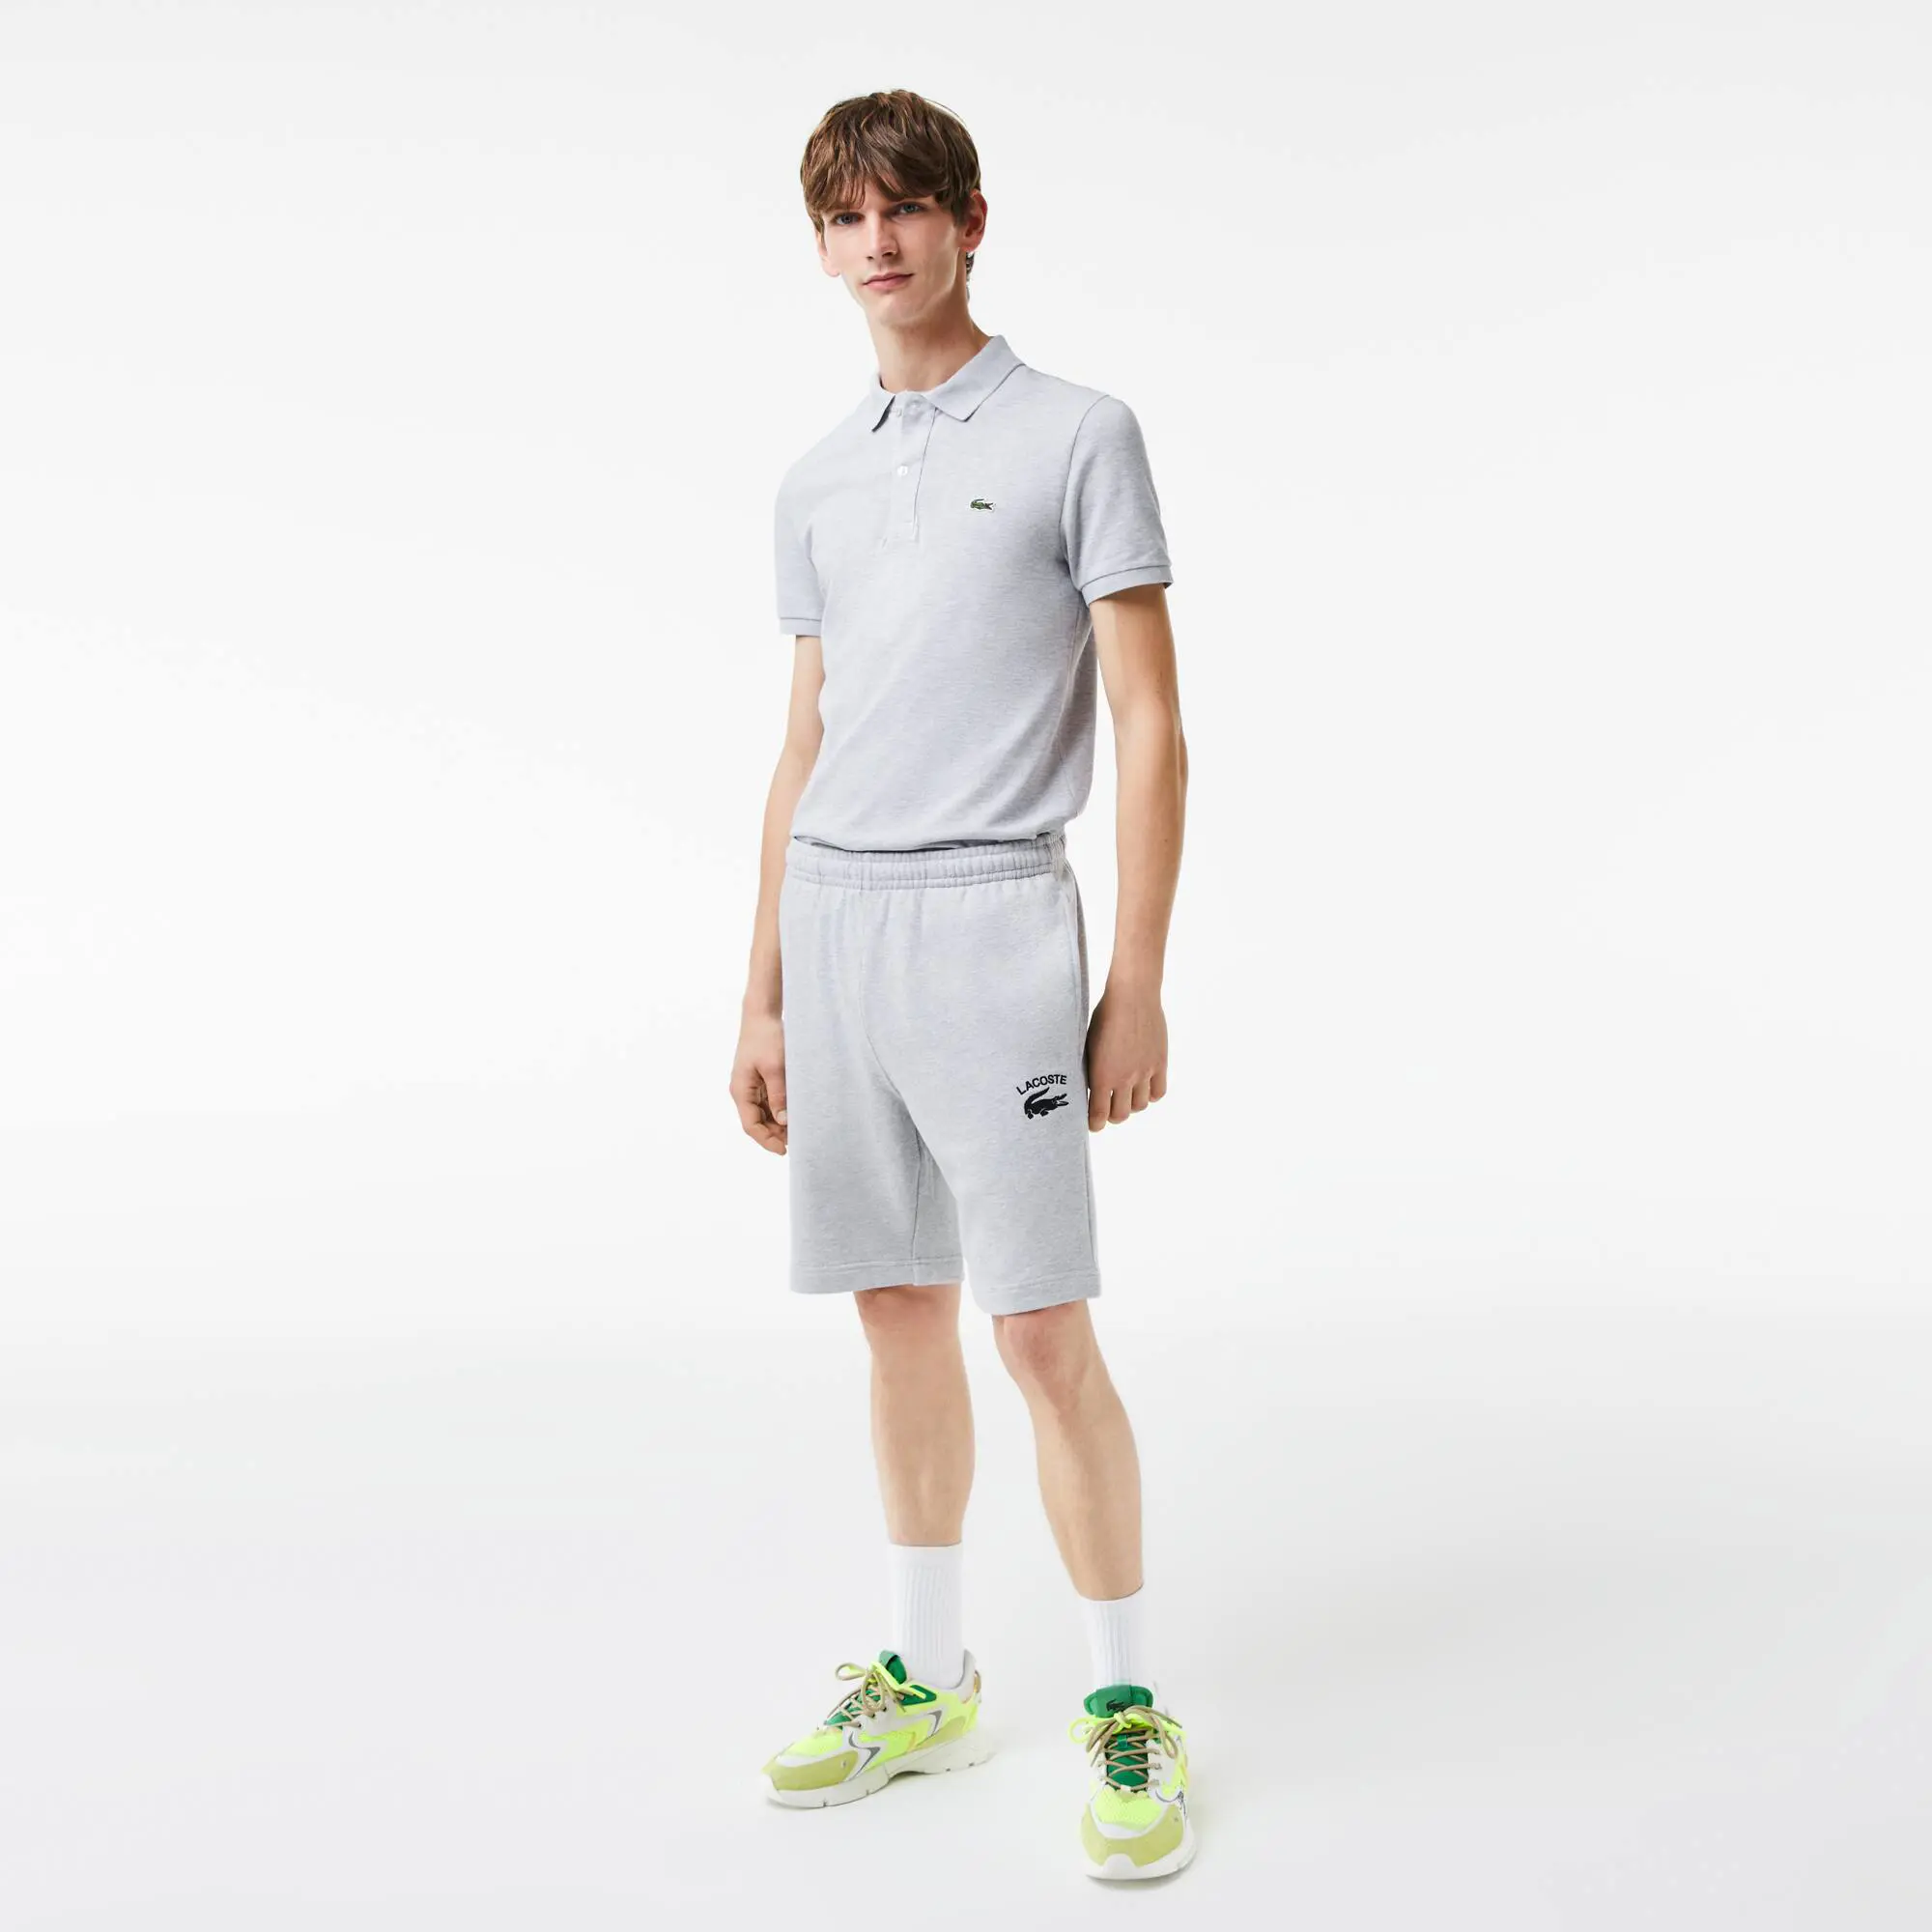 Lacoste Men's Lacoste Embroidery Shorts. 1